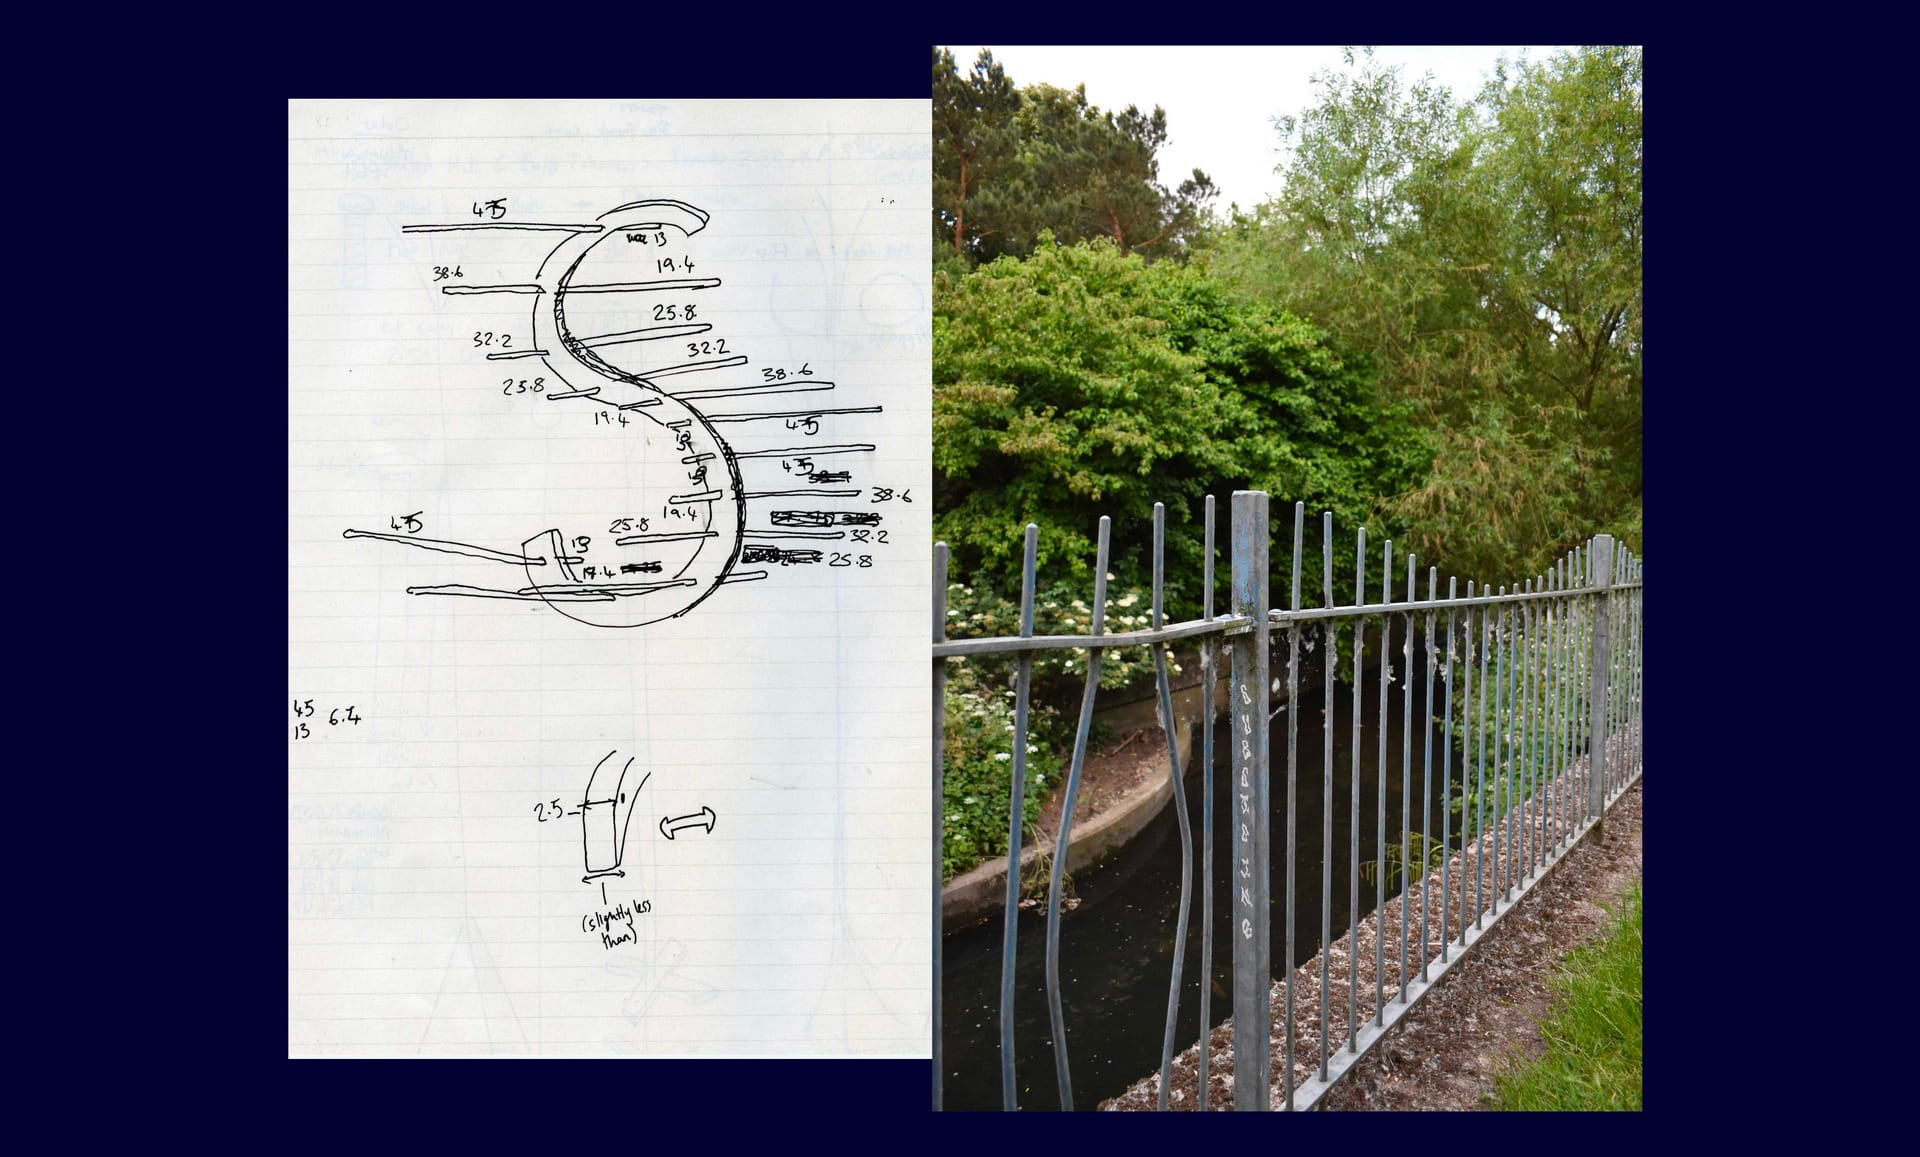 Image of a hand drawn plan, featuring an S shape on lined paper, next to a photograph of a metal railed fence, running along side water, with trees in the background.